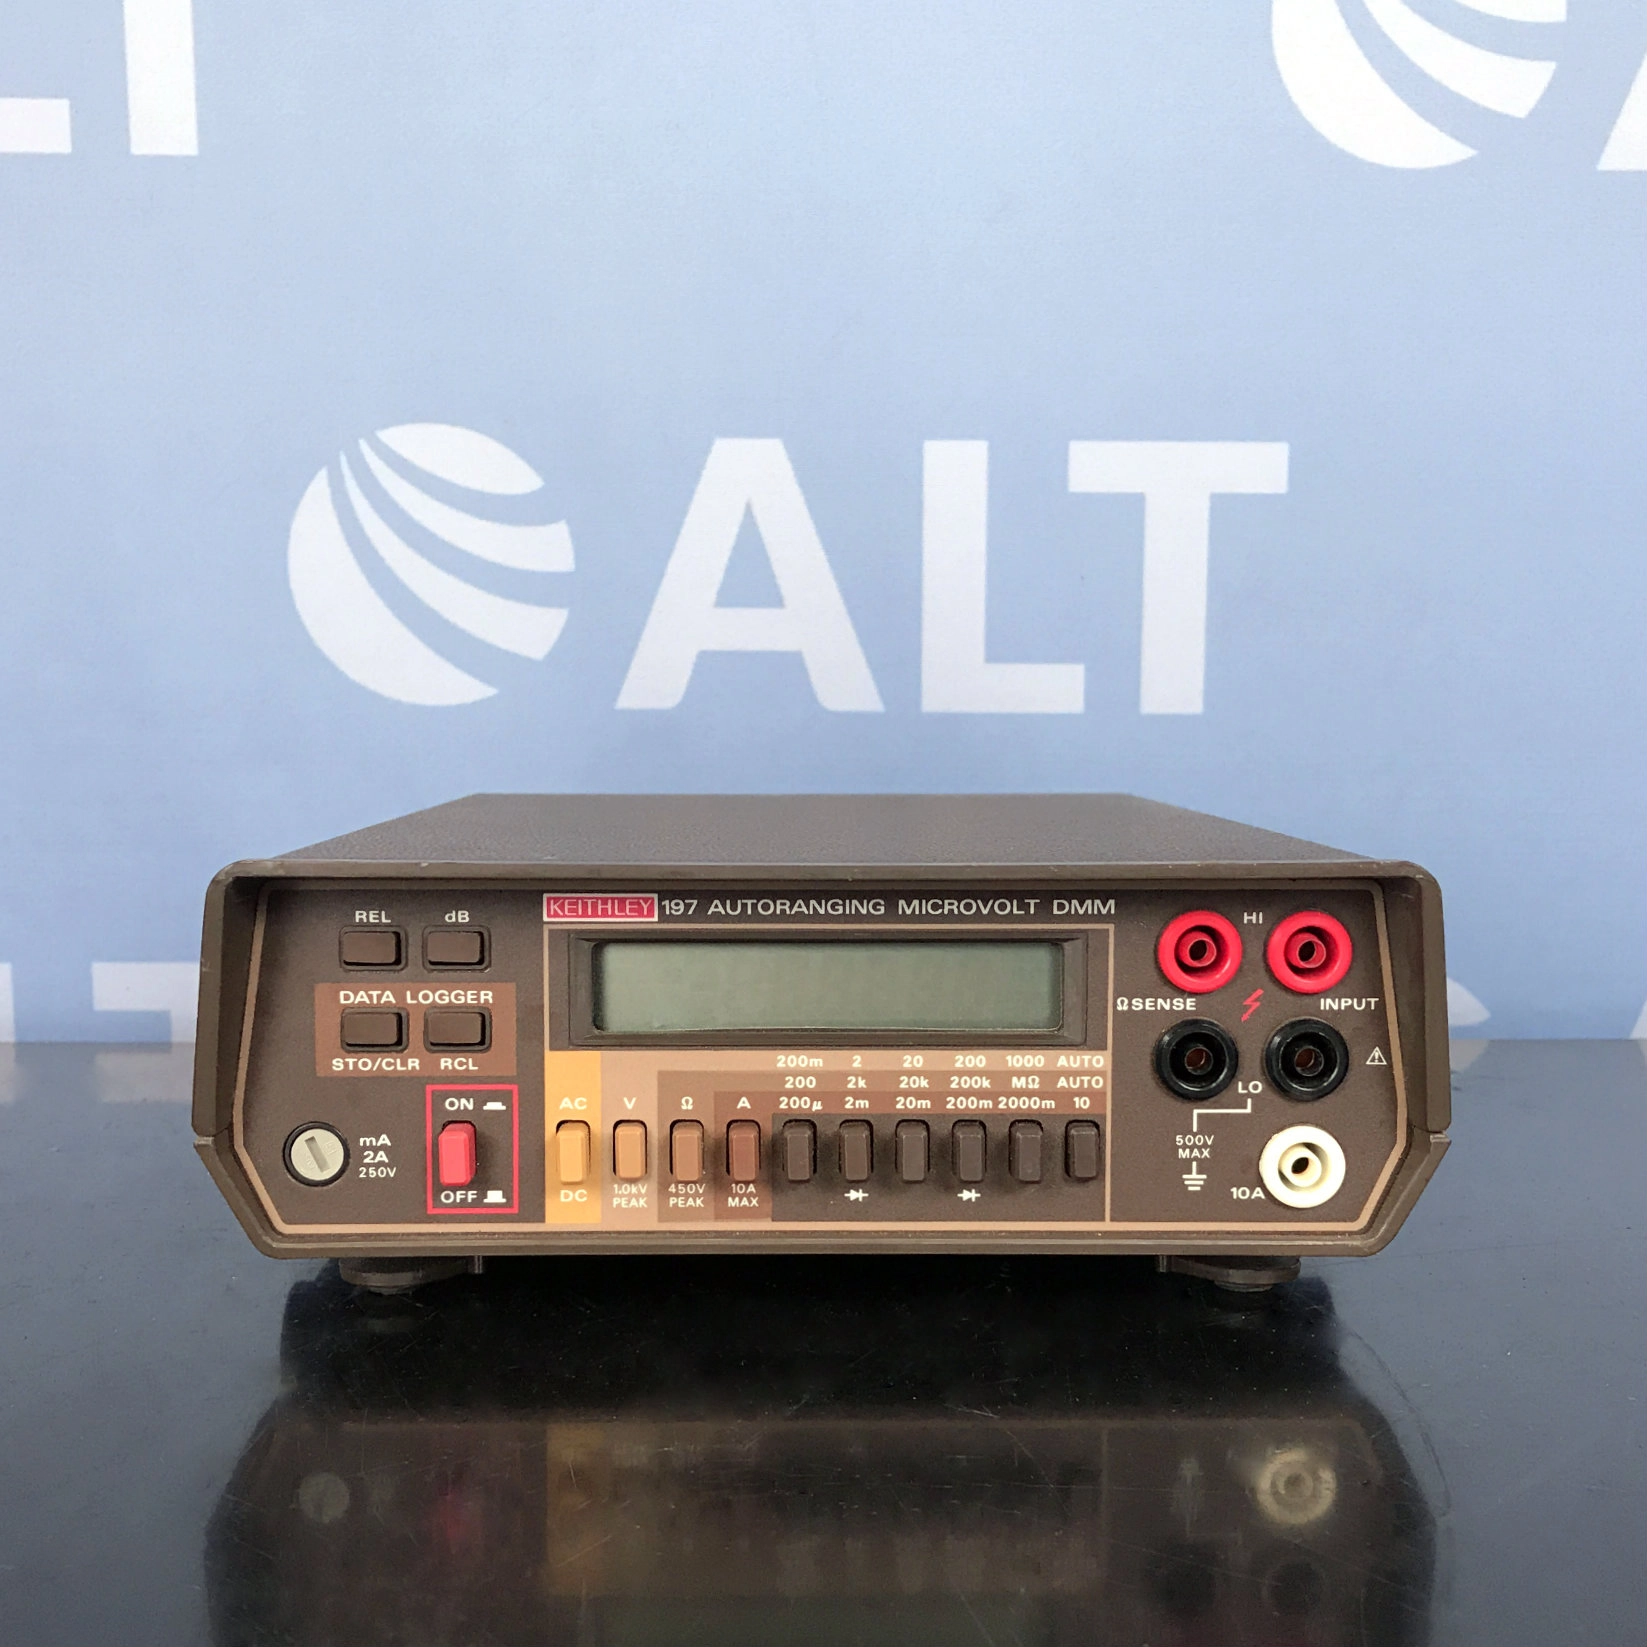 Keithley 197 Portable Autoranging Microvolt DMM